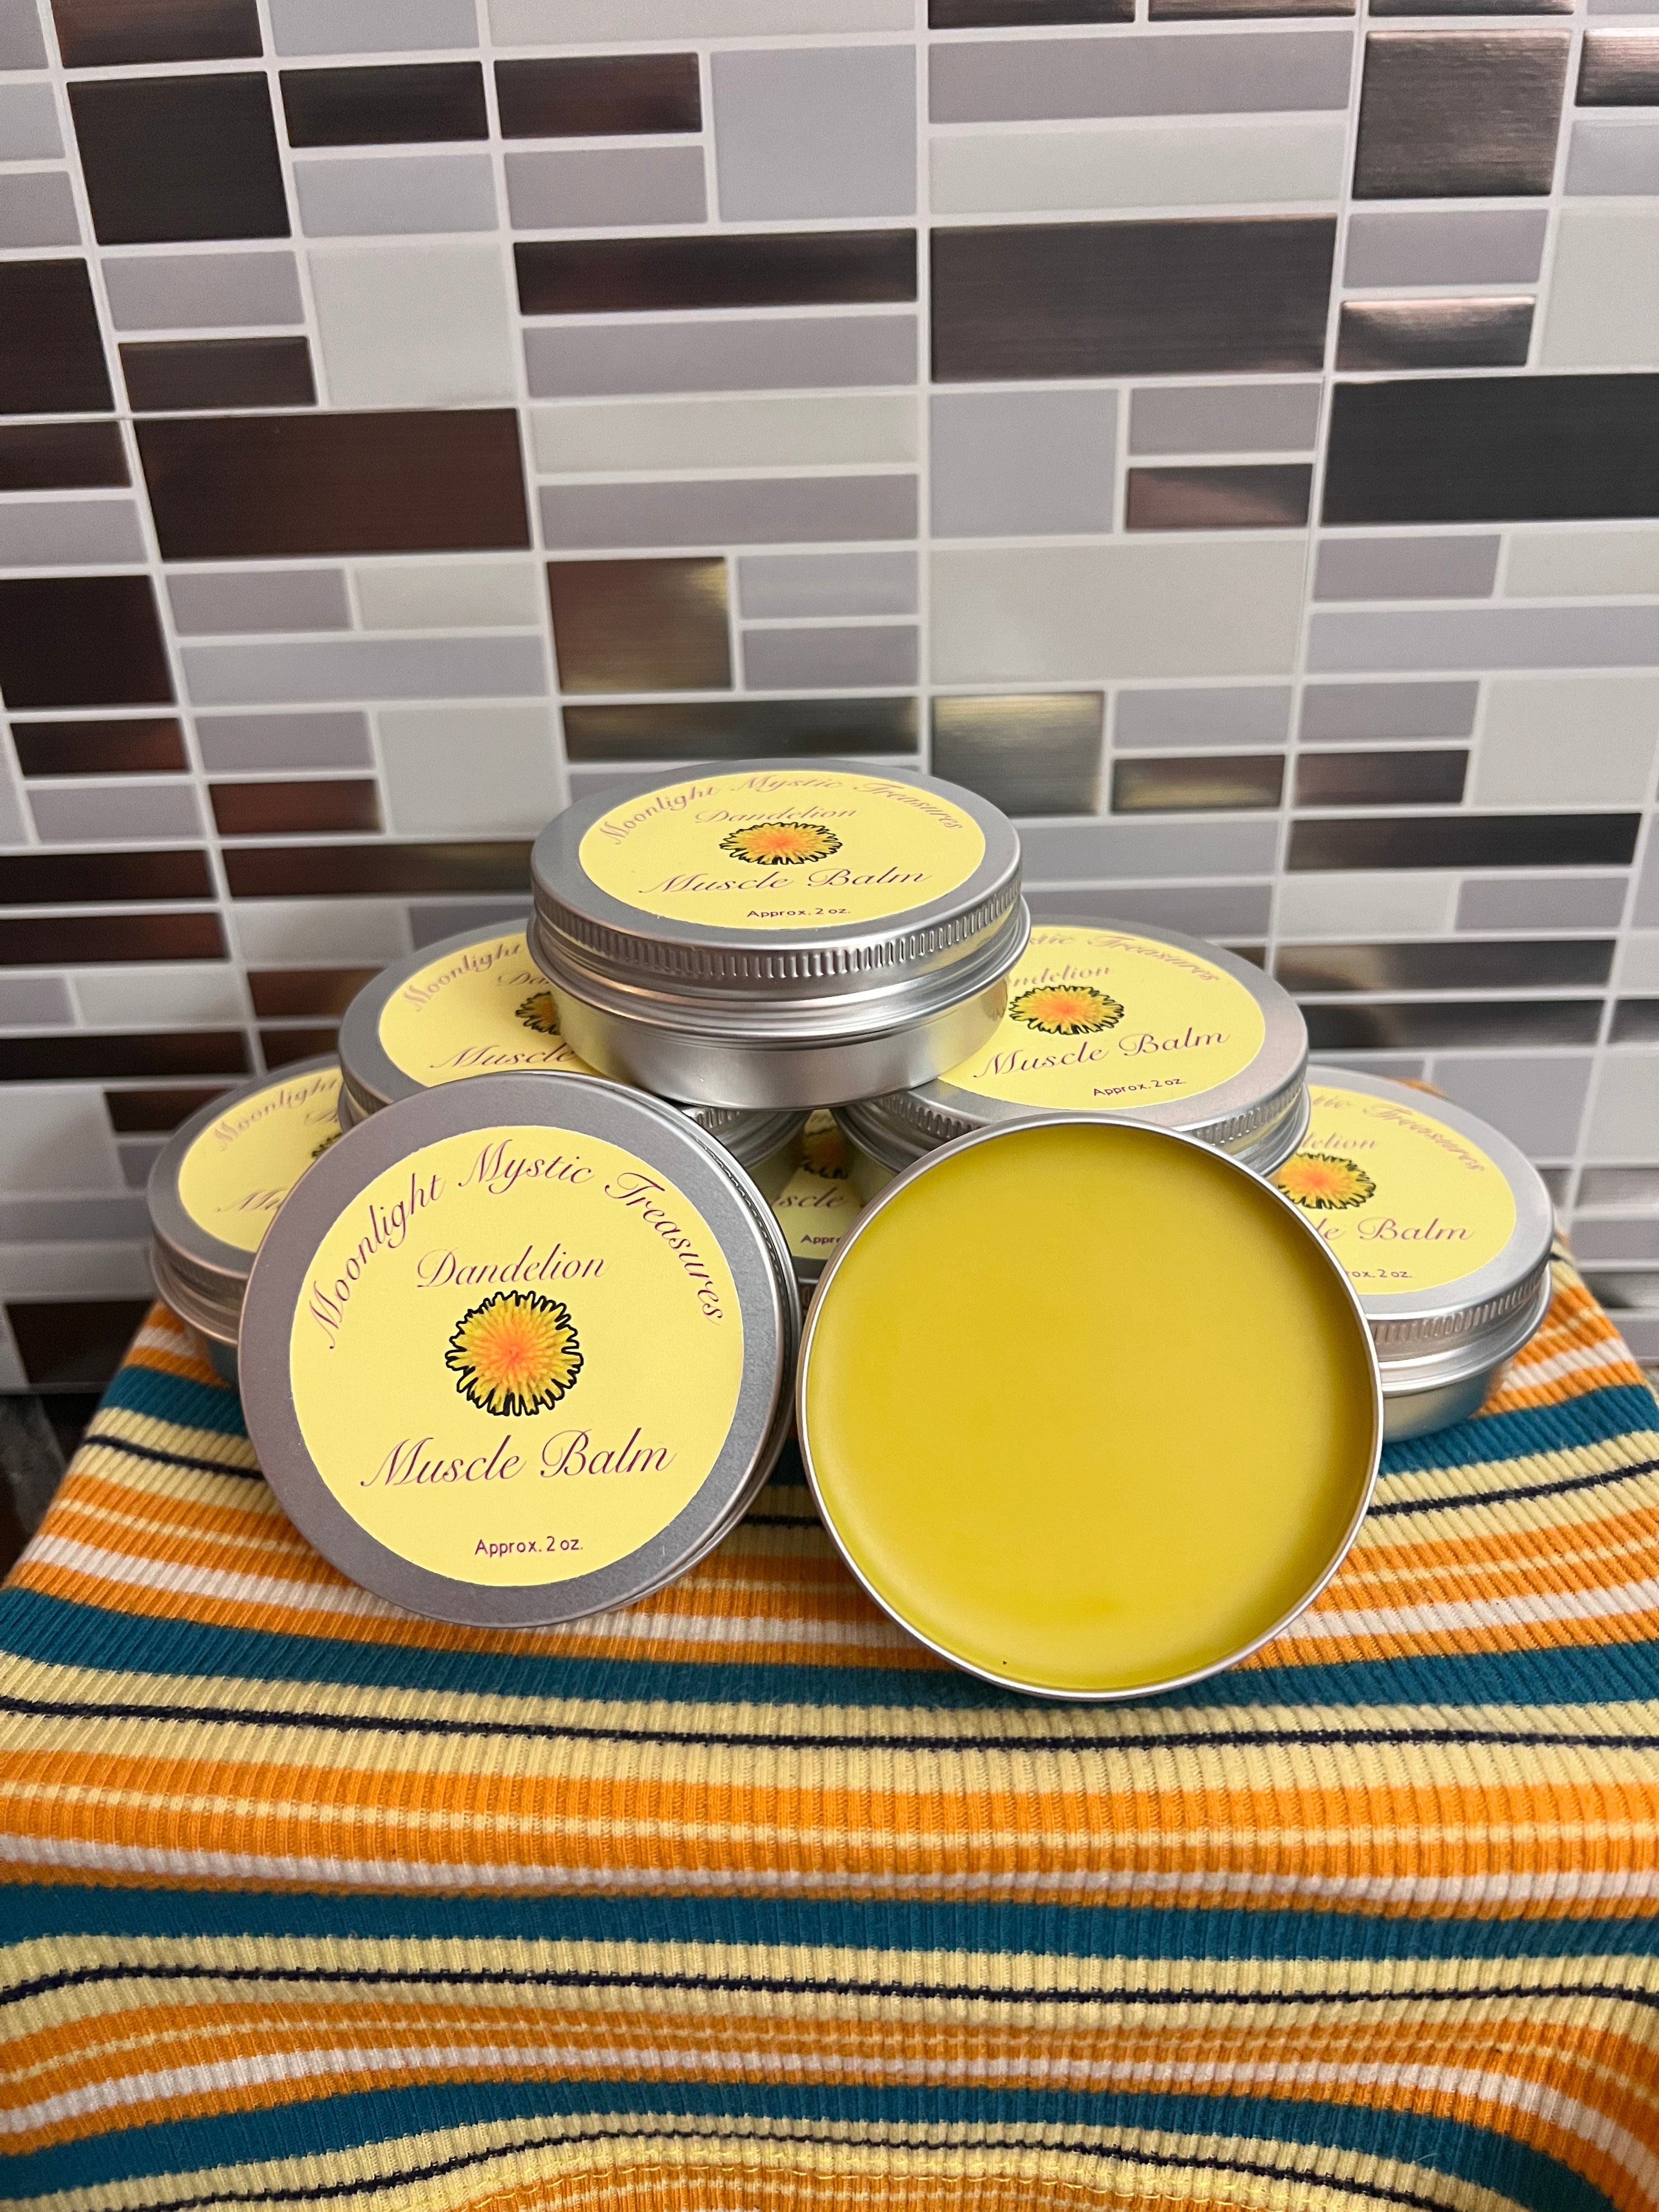 Dandelion Infused Muscle Balm - LIMITED EDITION